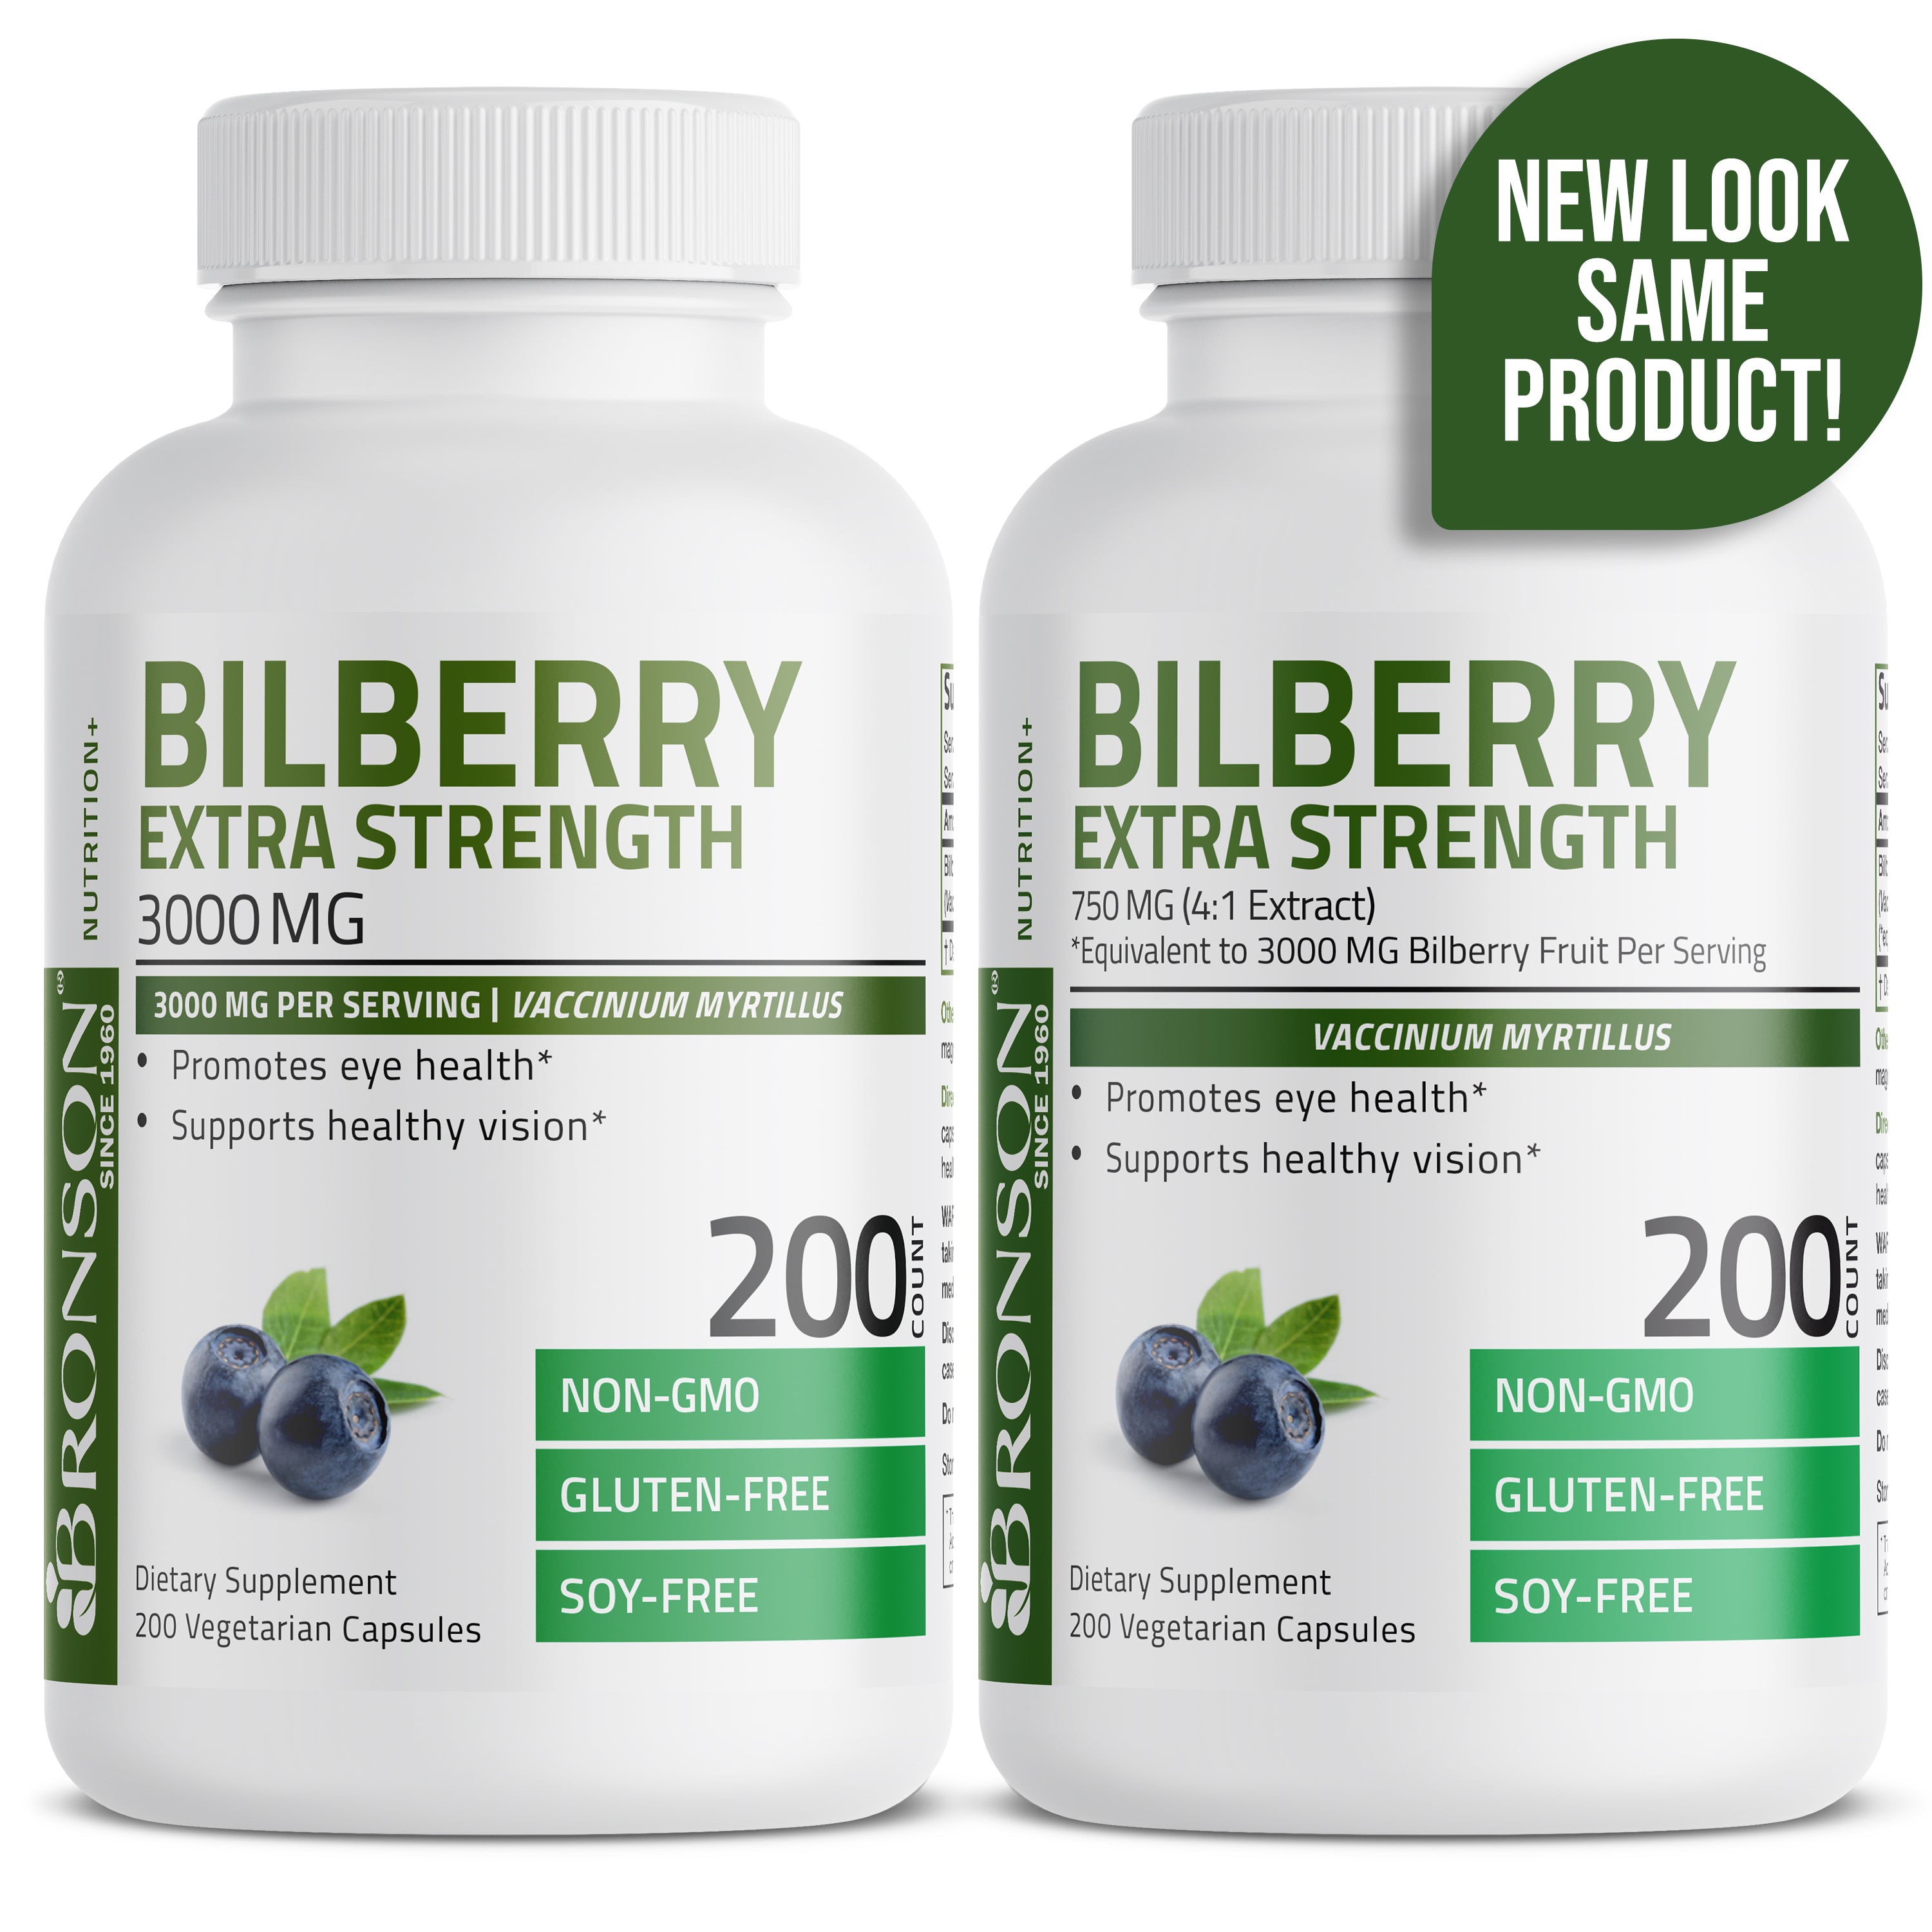 Bilberry Extra Strength 3000 mg, 200 Vegetarian Capsules view 3 of 7